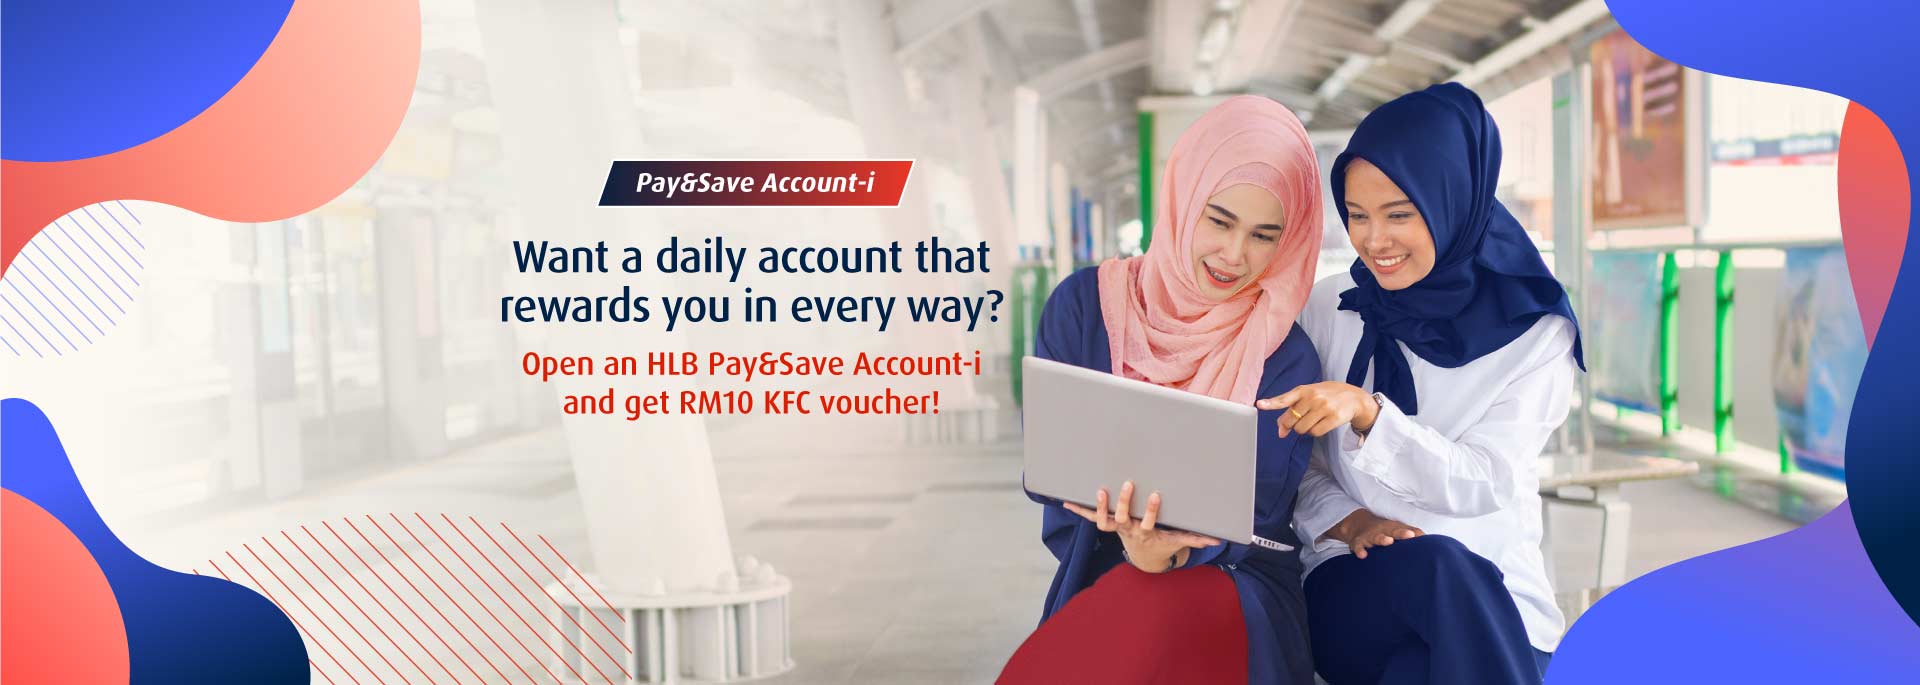 Enjoy hassle-free account opening at your doorstep!